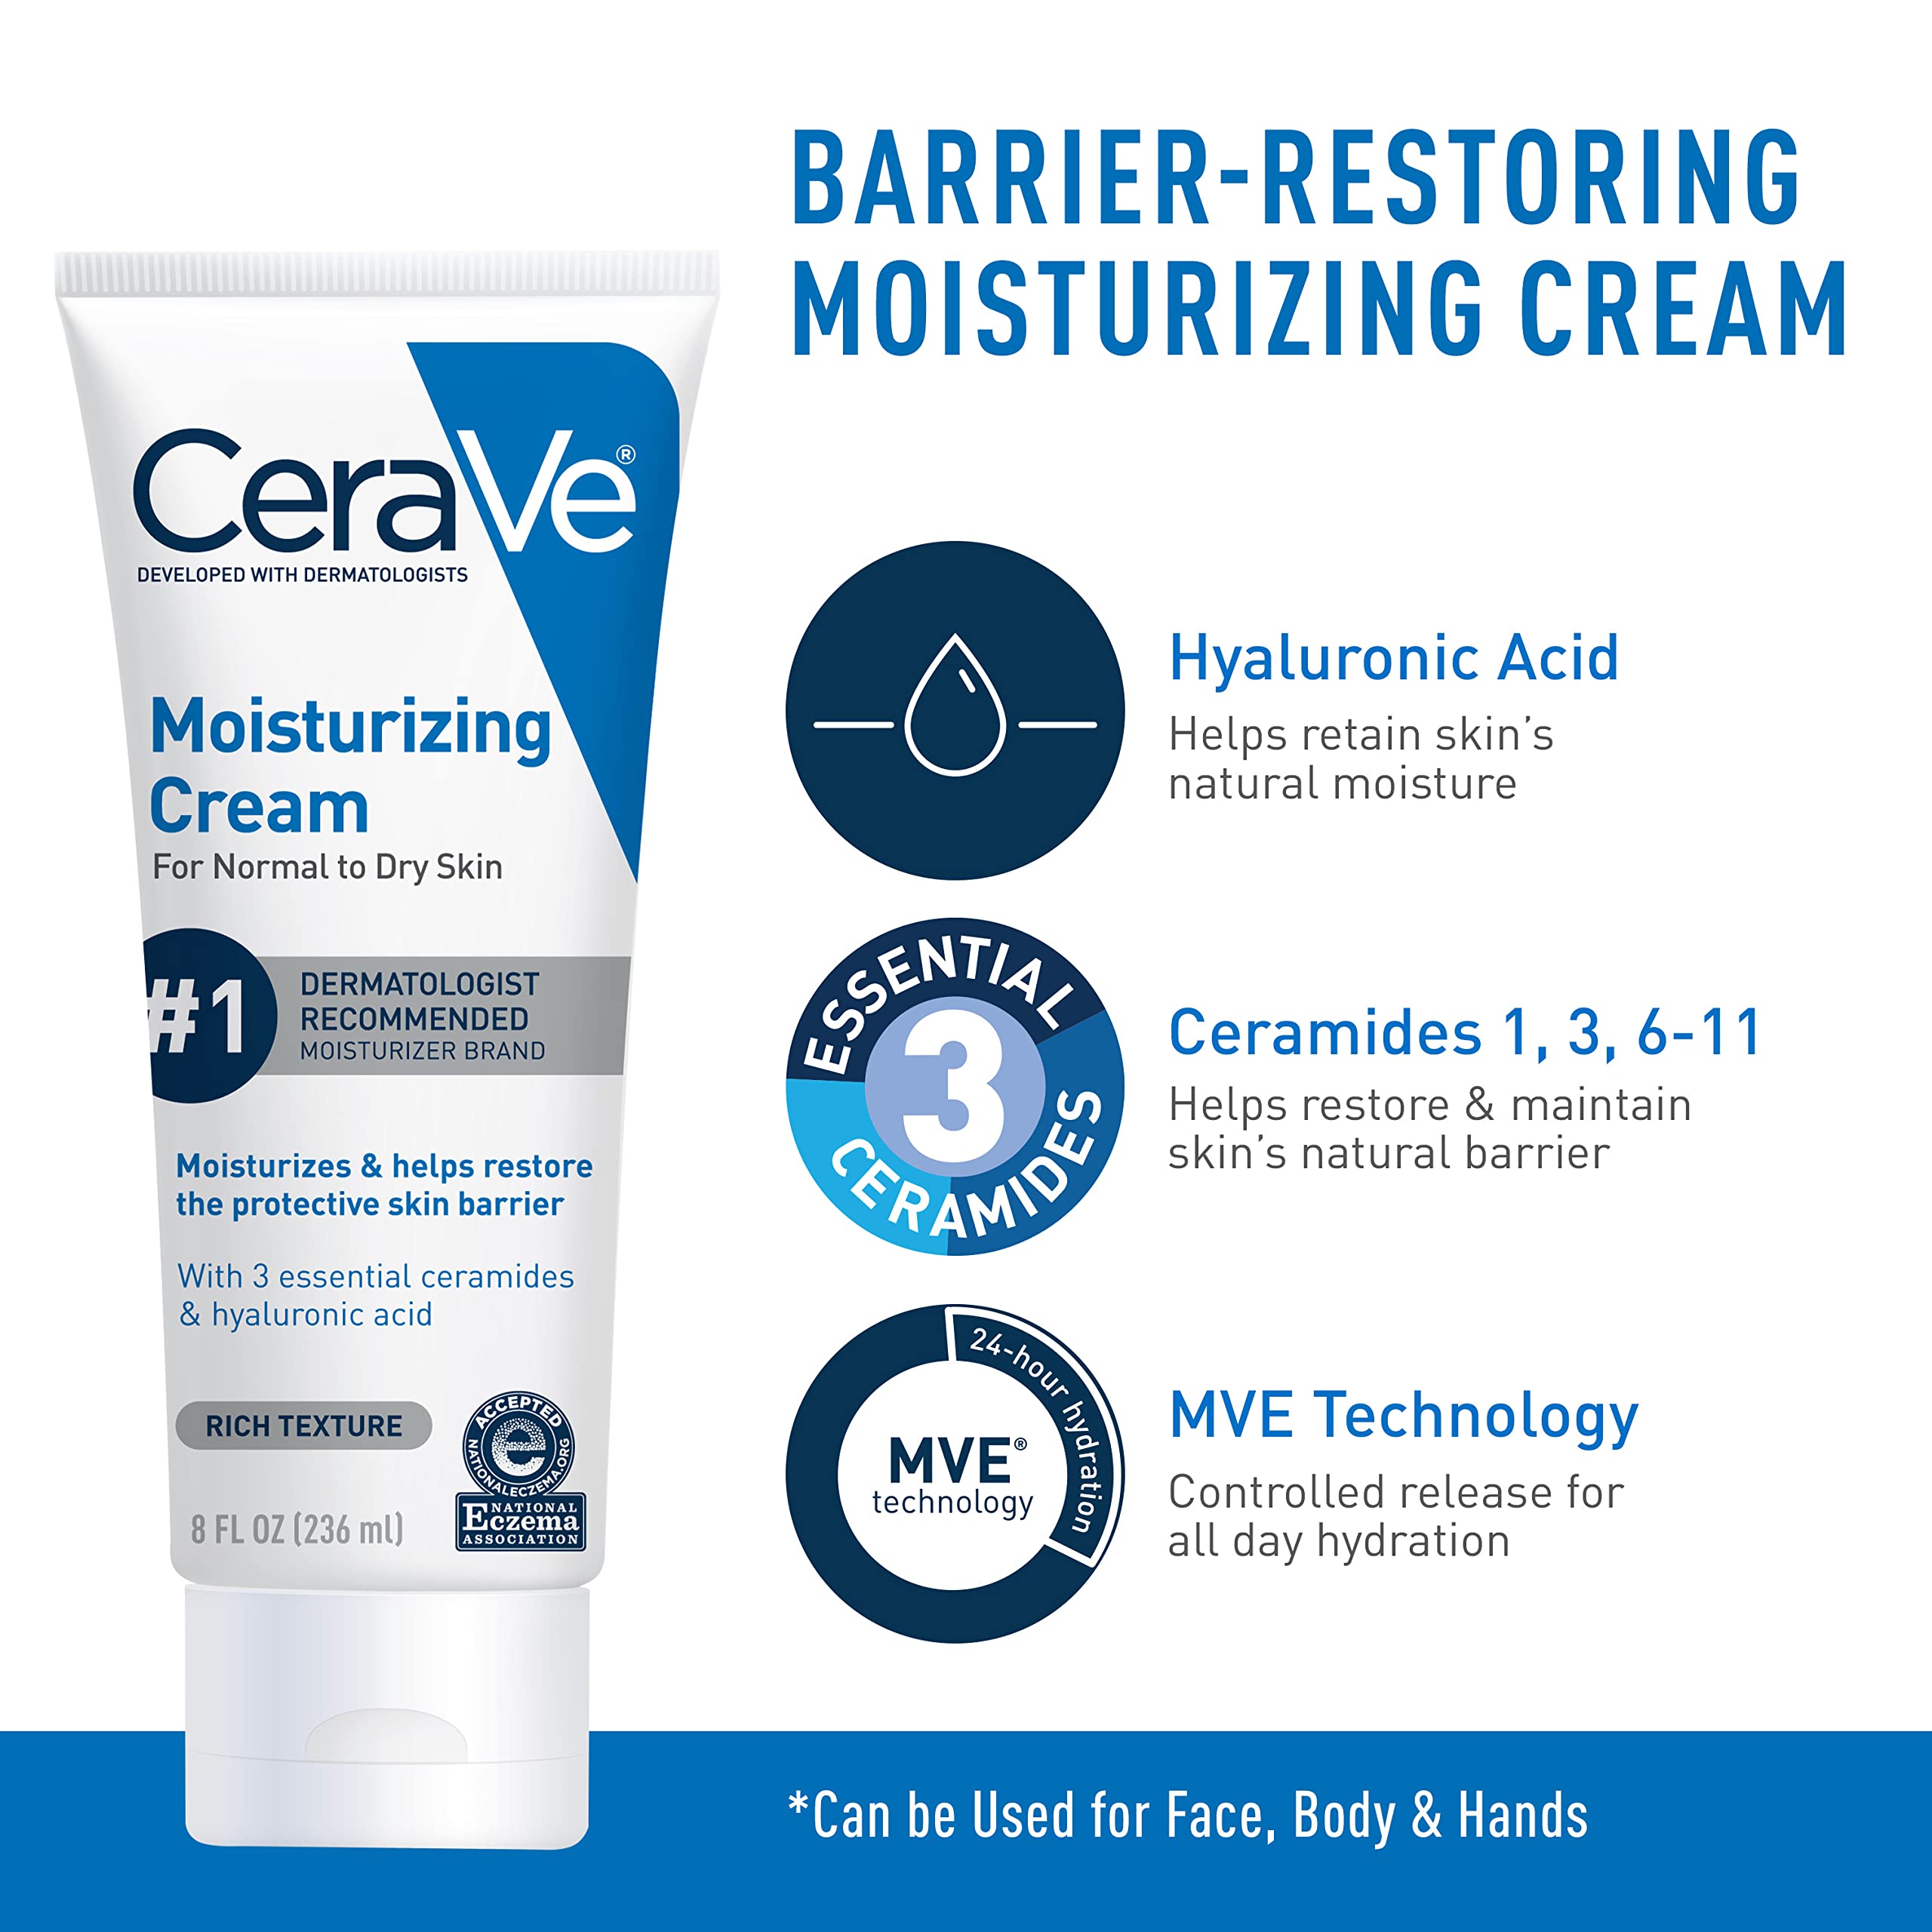 CeraVe Moisturizing Cream and Hydrating Skin Care Set for Dry Skin | Face & Body Cream and Non-Foaming Face Wash | Hyaluronic Acid and Ceramides | 8oz Cream + 8oz Cleanser